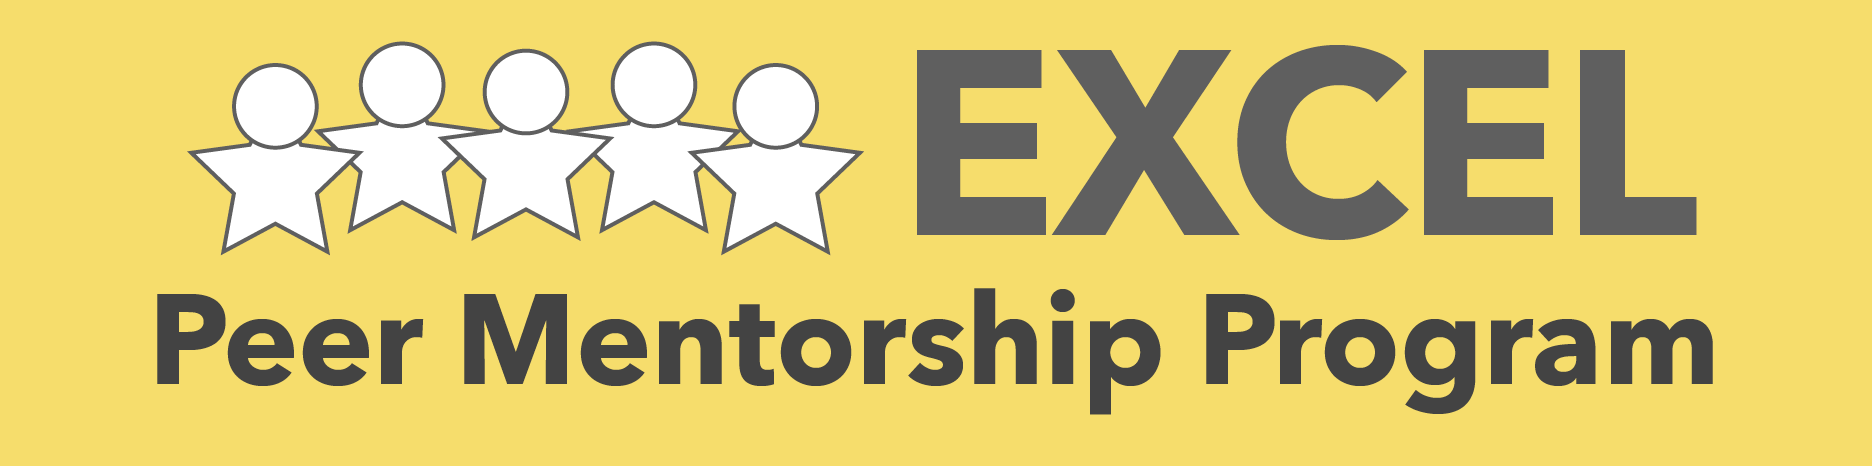 GradEXCEL Peer Mentor Program graphic in yellow and black with circles and stars